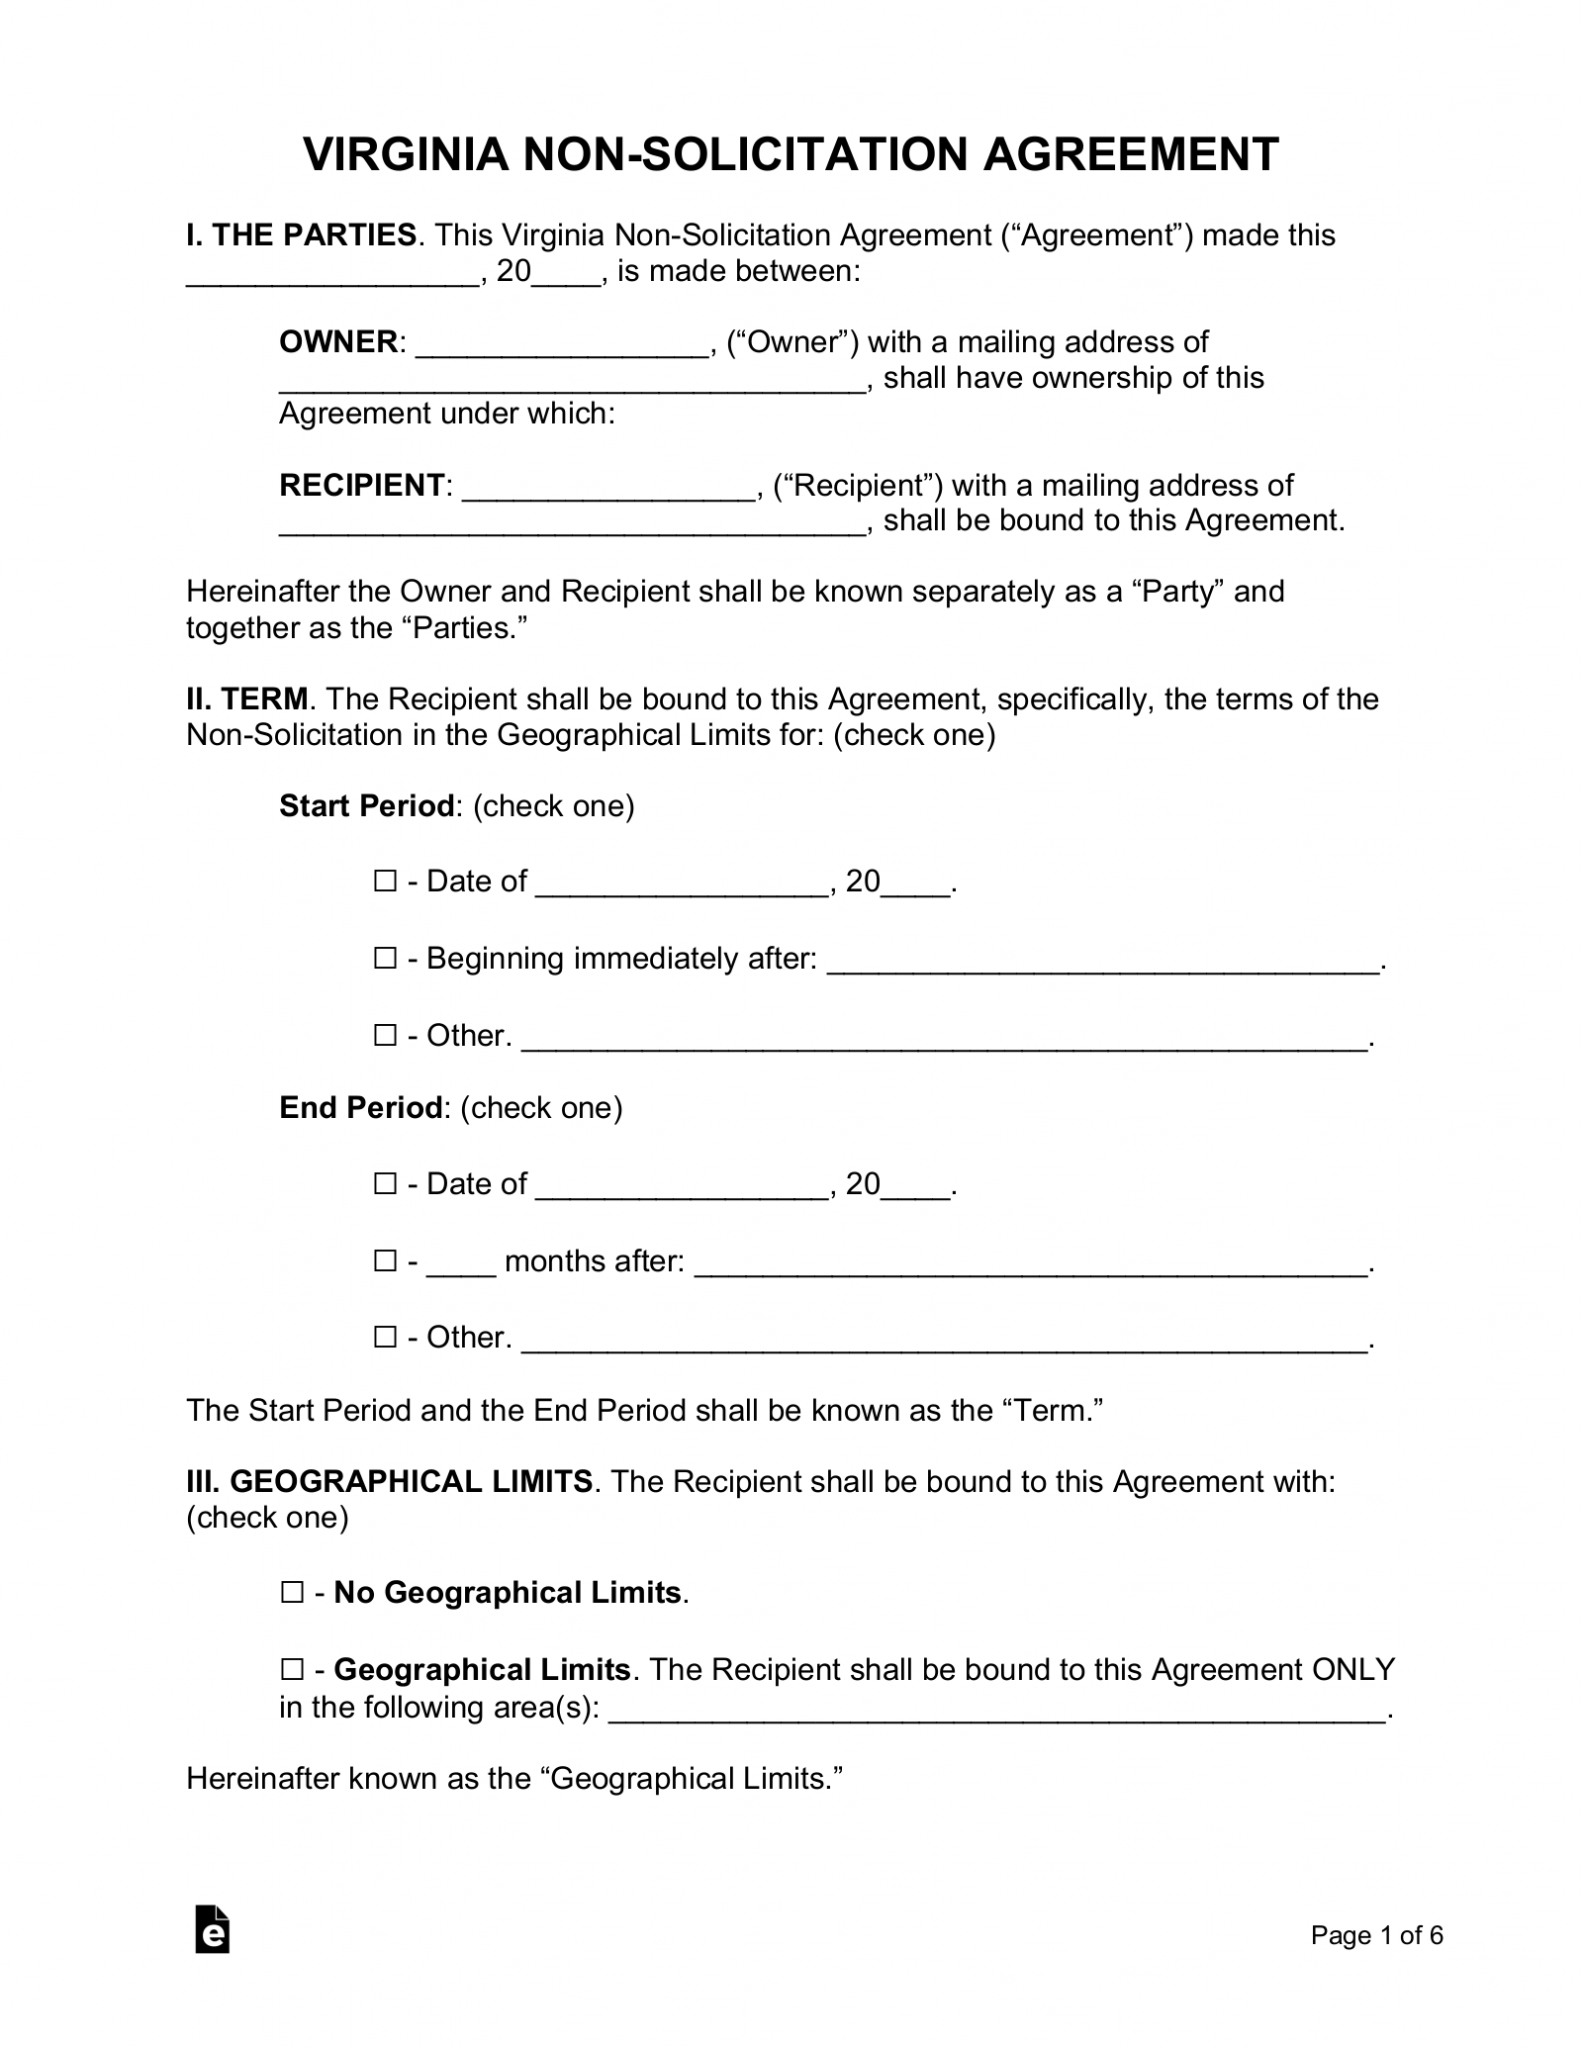 free-virginia-non-solicitation-agreement-pdf-word-eforms